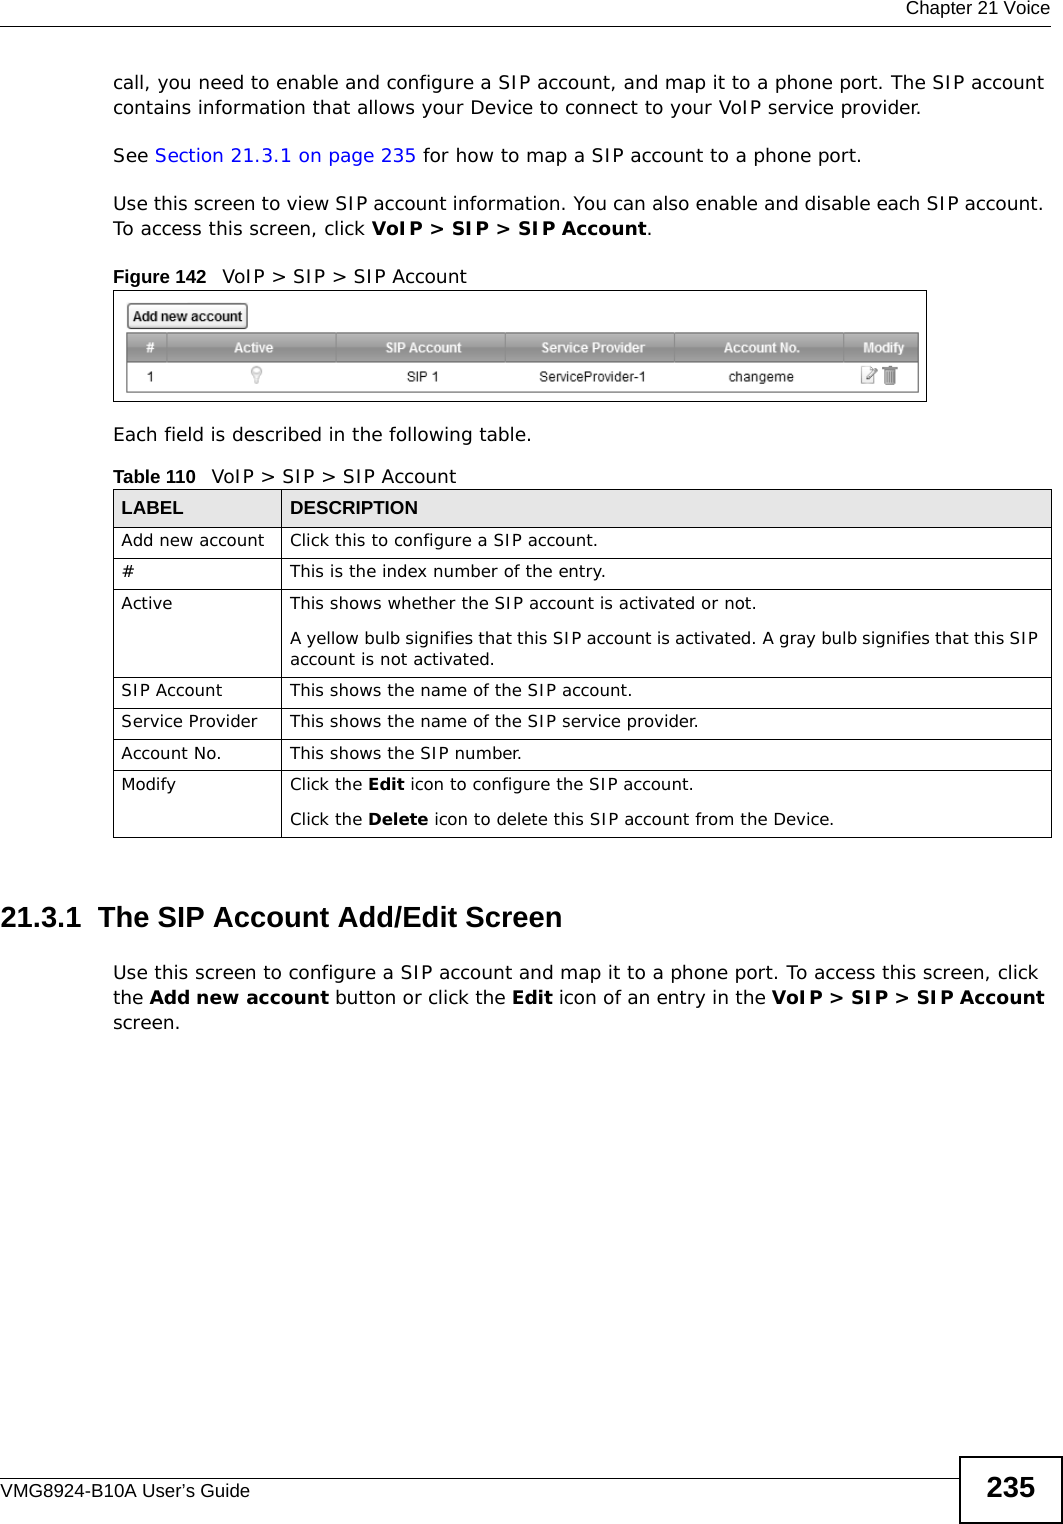  Chapter 21 VoiceVMG8924-B10A User’s Guide 235call, you need to enable and configure a SIP account, and map it to a phone port. The SIP account contains information that allows your Device to connect to your VoIP service provider.See Section 21.3.1 on page 235 for how to map a SIP account to a phone port.Use this screen to view SIP account information. You can also enable and disable each SIP account. To access this screen, click VoIP &gt; SIP &gt; SIP Account.Figure 142   VoIP &gt; SIP &gt; SIP AccountEach field is described in the following table.21.3.1  The SIP Account Add/Edit Screen Use this screen to configure a SIP account and map it to a phone port. To access this screen, click the Add new account button or click the Edit icon of an entry in the VoIP &gt; SIP &gt; SIP Account screen.Table 110   VoIP &gt; SIP &gt; SIP AccountLABEL DESCRIPTIONAdd new account Click this to configure a SIP account.# This is the index number of the entry.Active This shows whether the SIP account is activated or not.A yellow bulb signifies that this SIP account is activated. A gray bulb signifies that this SIP account is not activated.SIP Account  This shows the name of the SIP account.Service Provider This shows the name of the SIP service provider.Account No. This shows the SIP number.Modify Click the Edit icon to configure the SIP account.Click the Delete icon to delete this SIP account from the Device. 